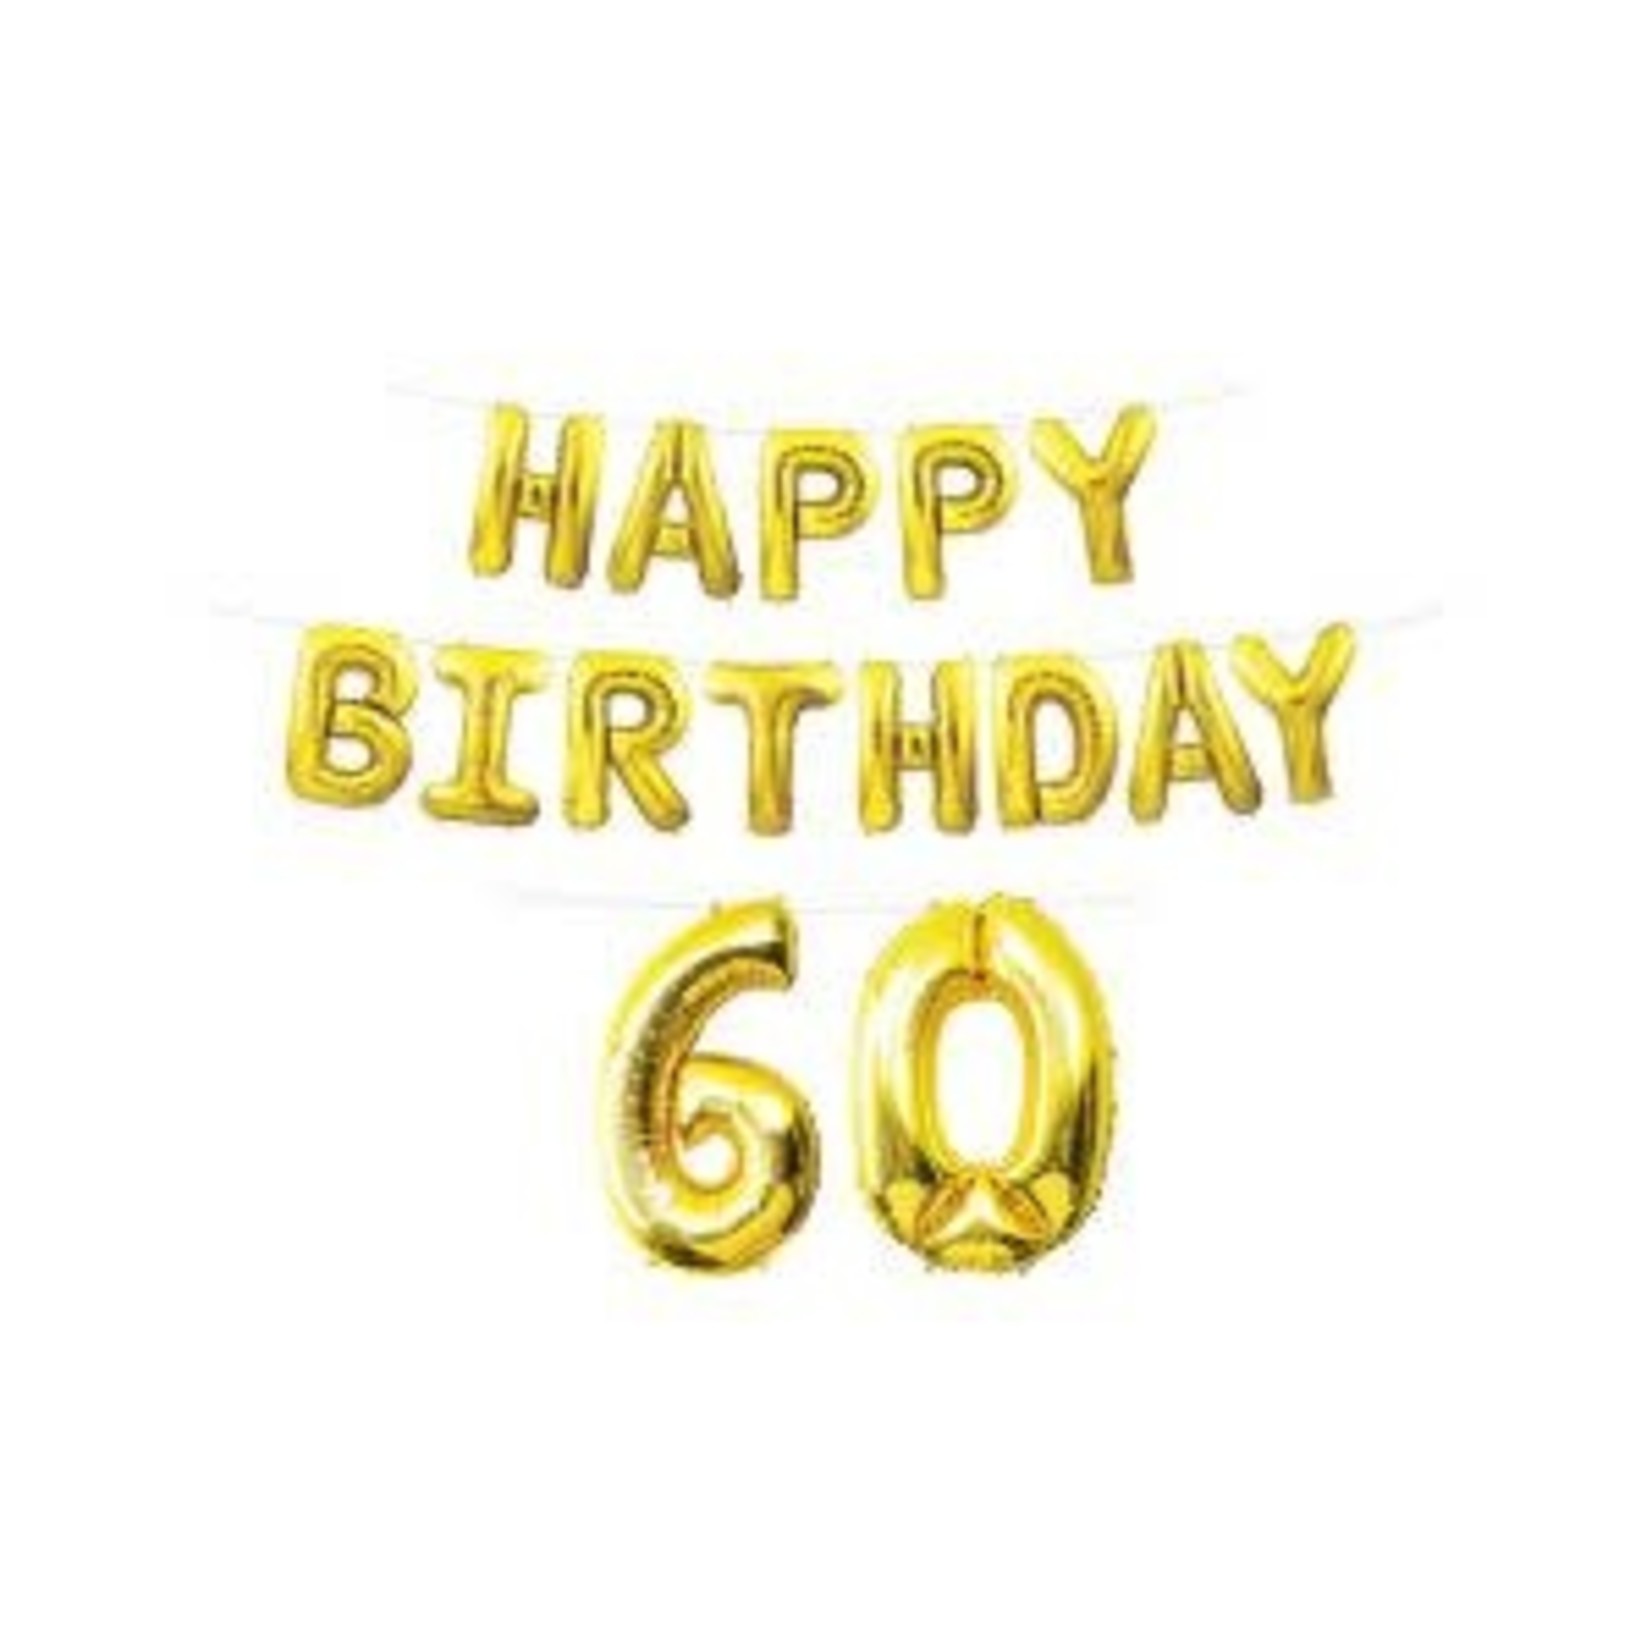 Beistle Gold Happy 60th Birthday Air-Filled Letter Balloon Banner - 15ft.